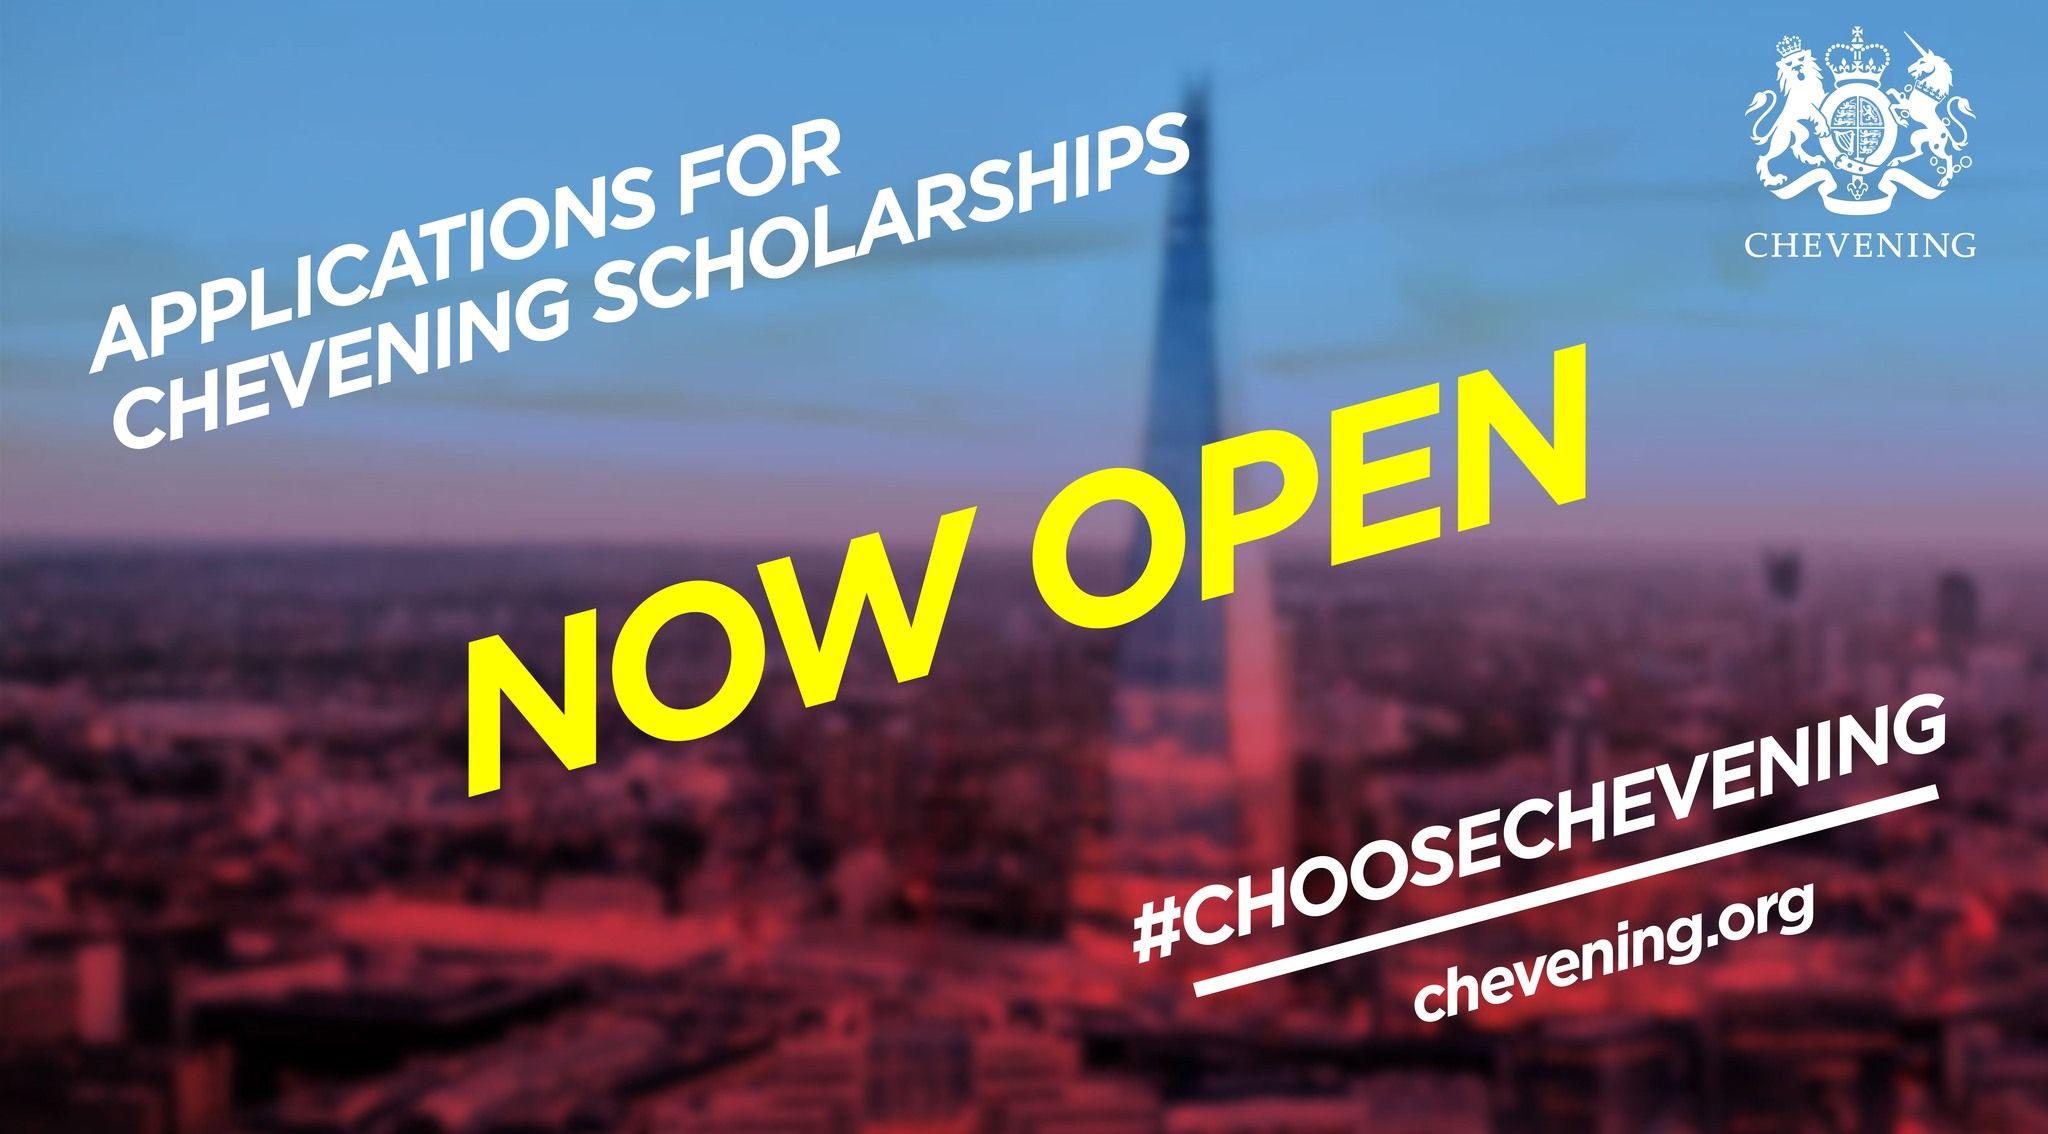 Chevening Scholarship are now open!